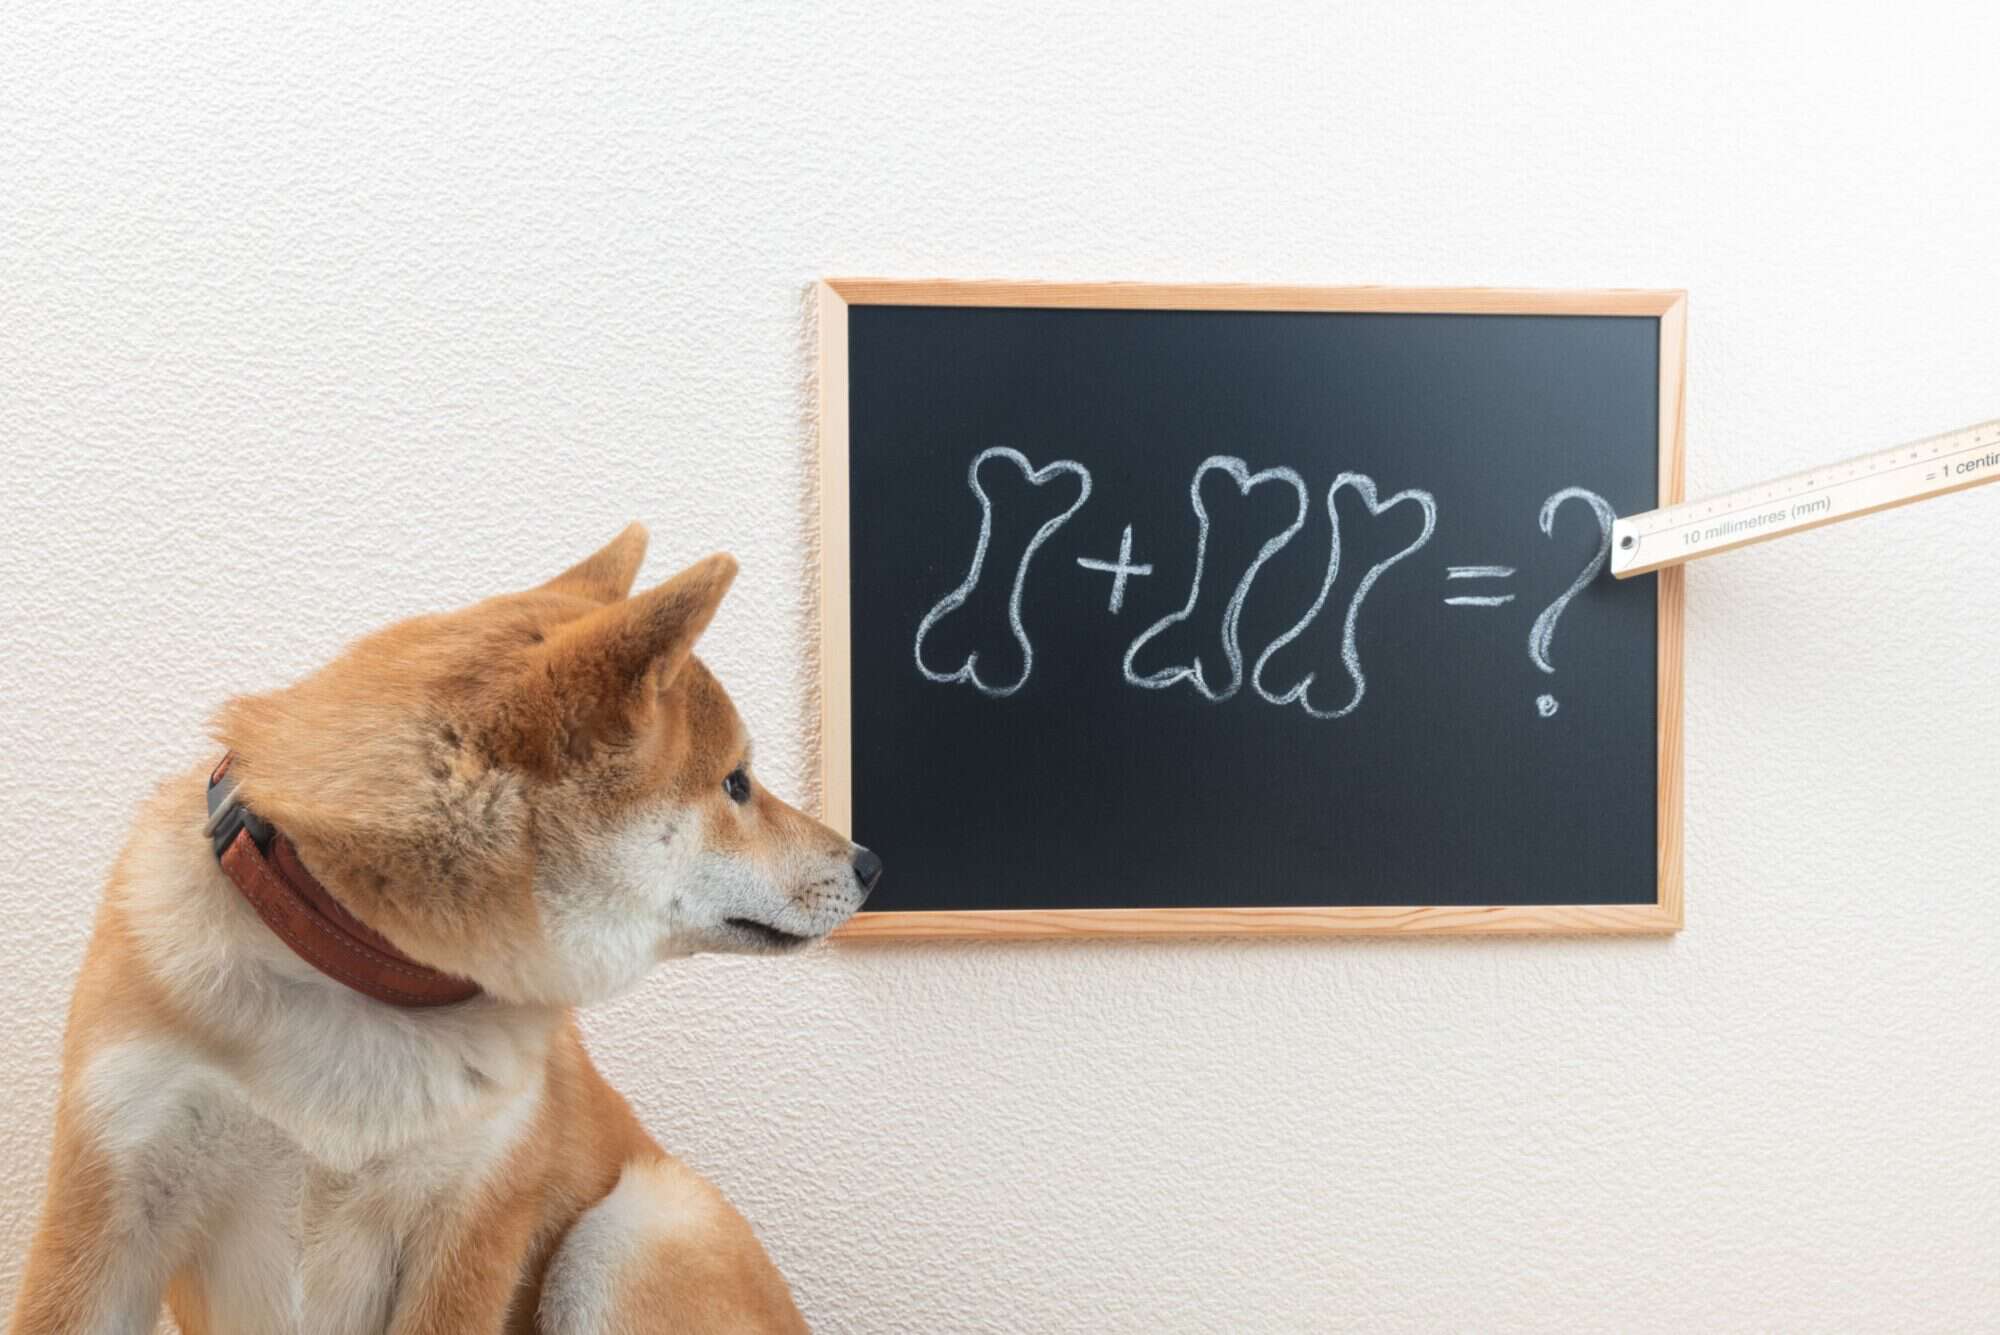 Puppy looking at math problem.